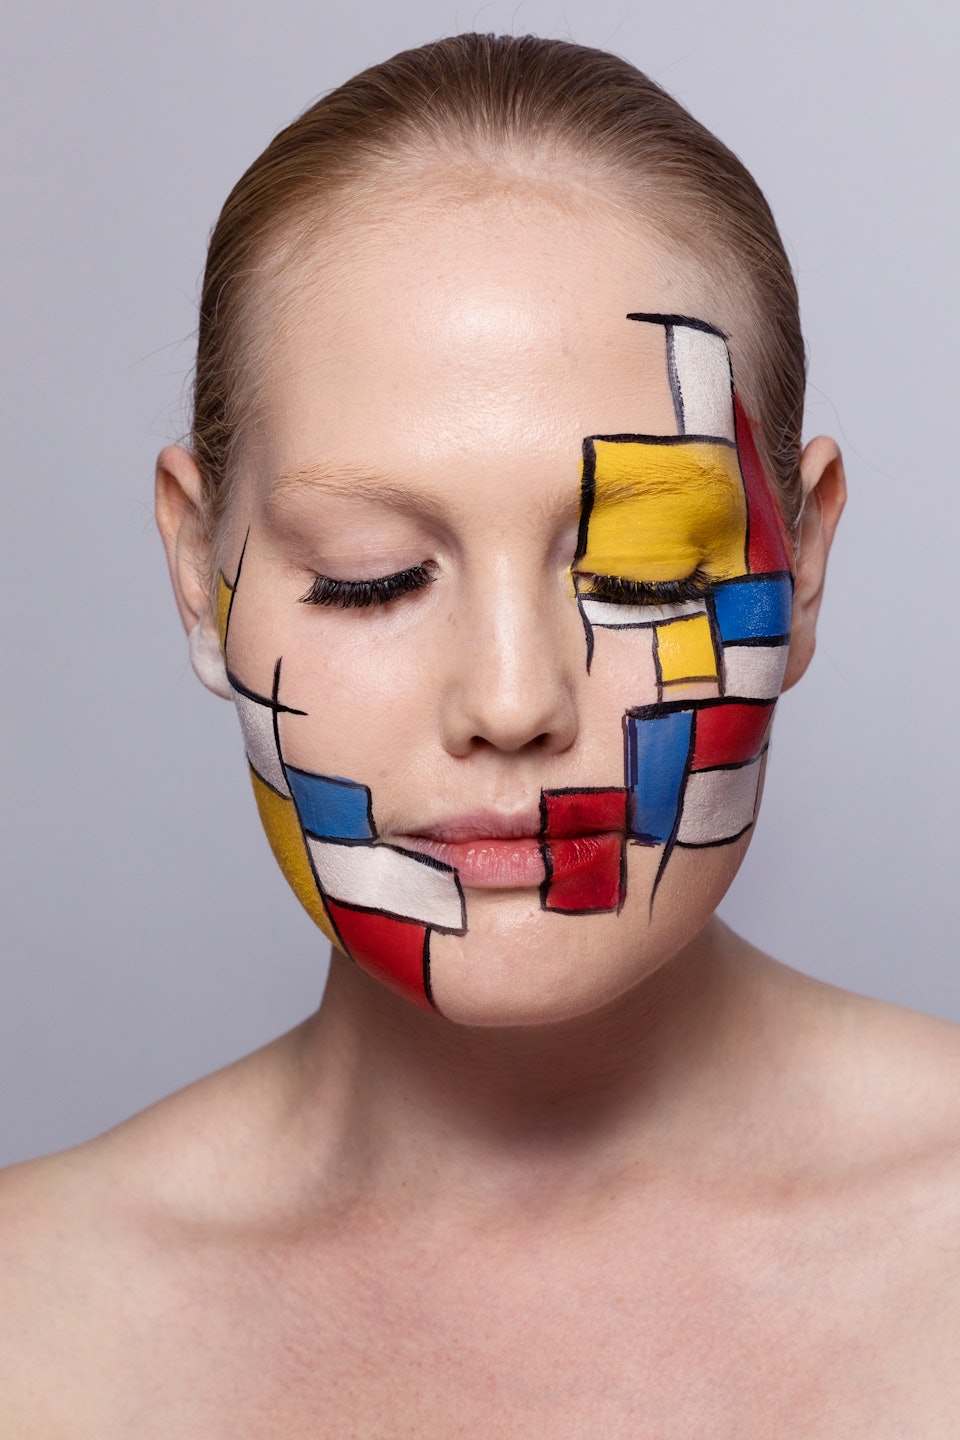 4 Art Inspired Halloween Makeup Tutorials That Are Easier Than They Look